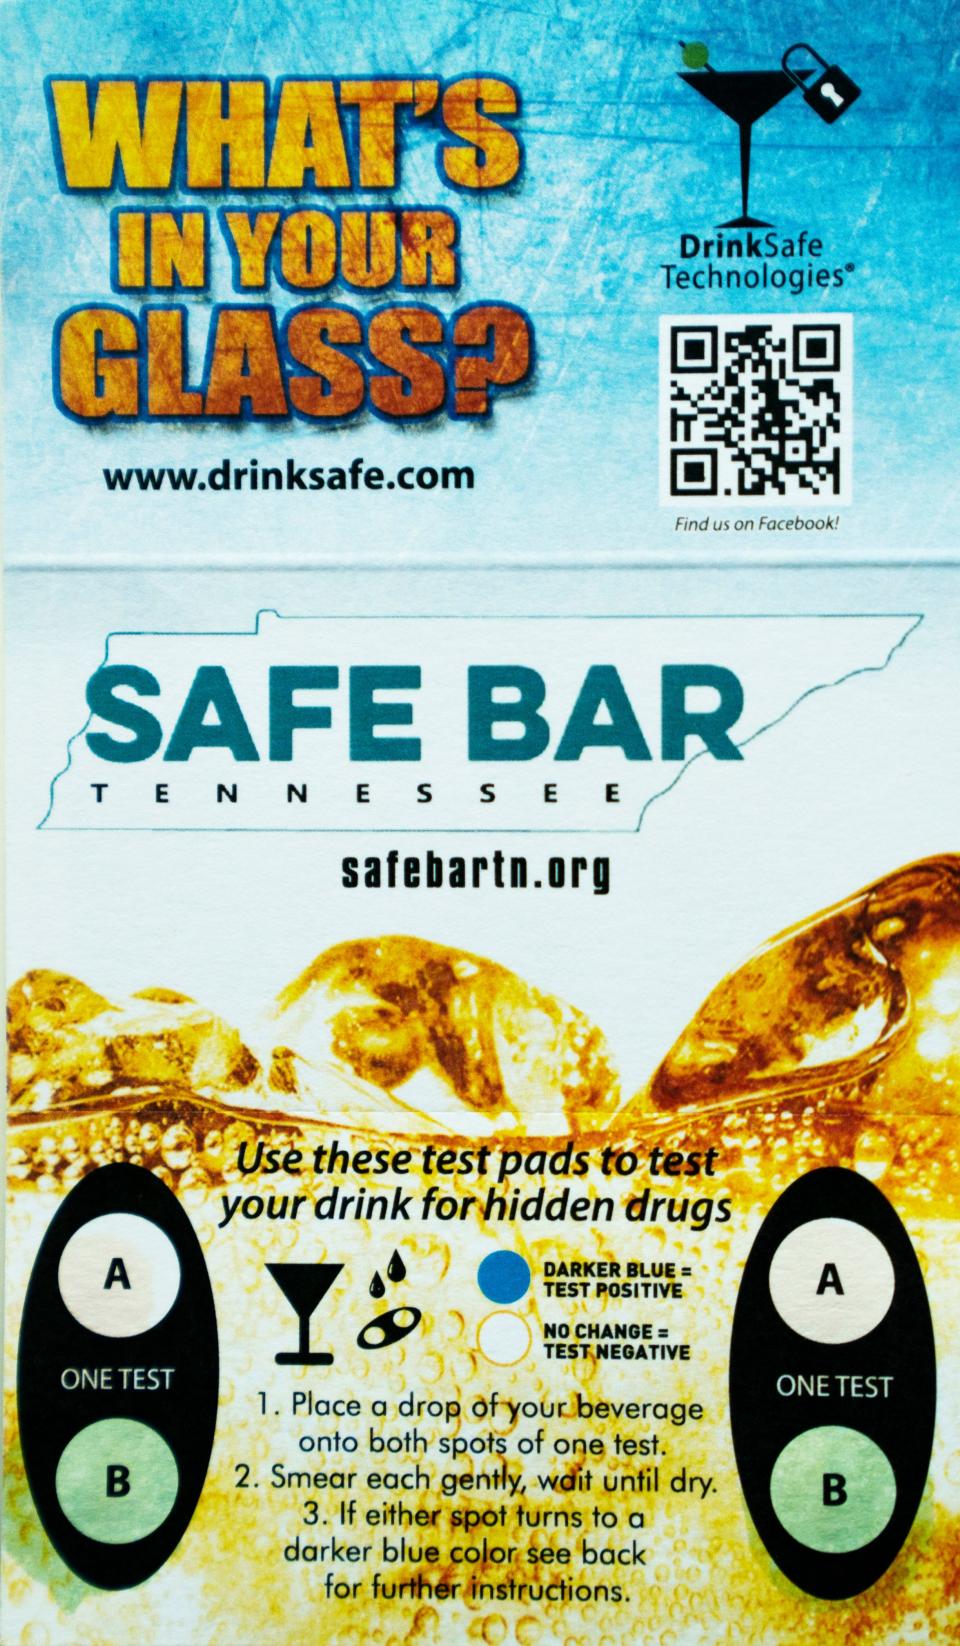 The Sexual Assault Center in Nashville's "Safe Bar" program supplies tests for patrons to check for common date rape drugs like ketamine and GHB (gamma hydroxybutyrate).